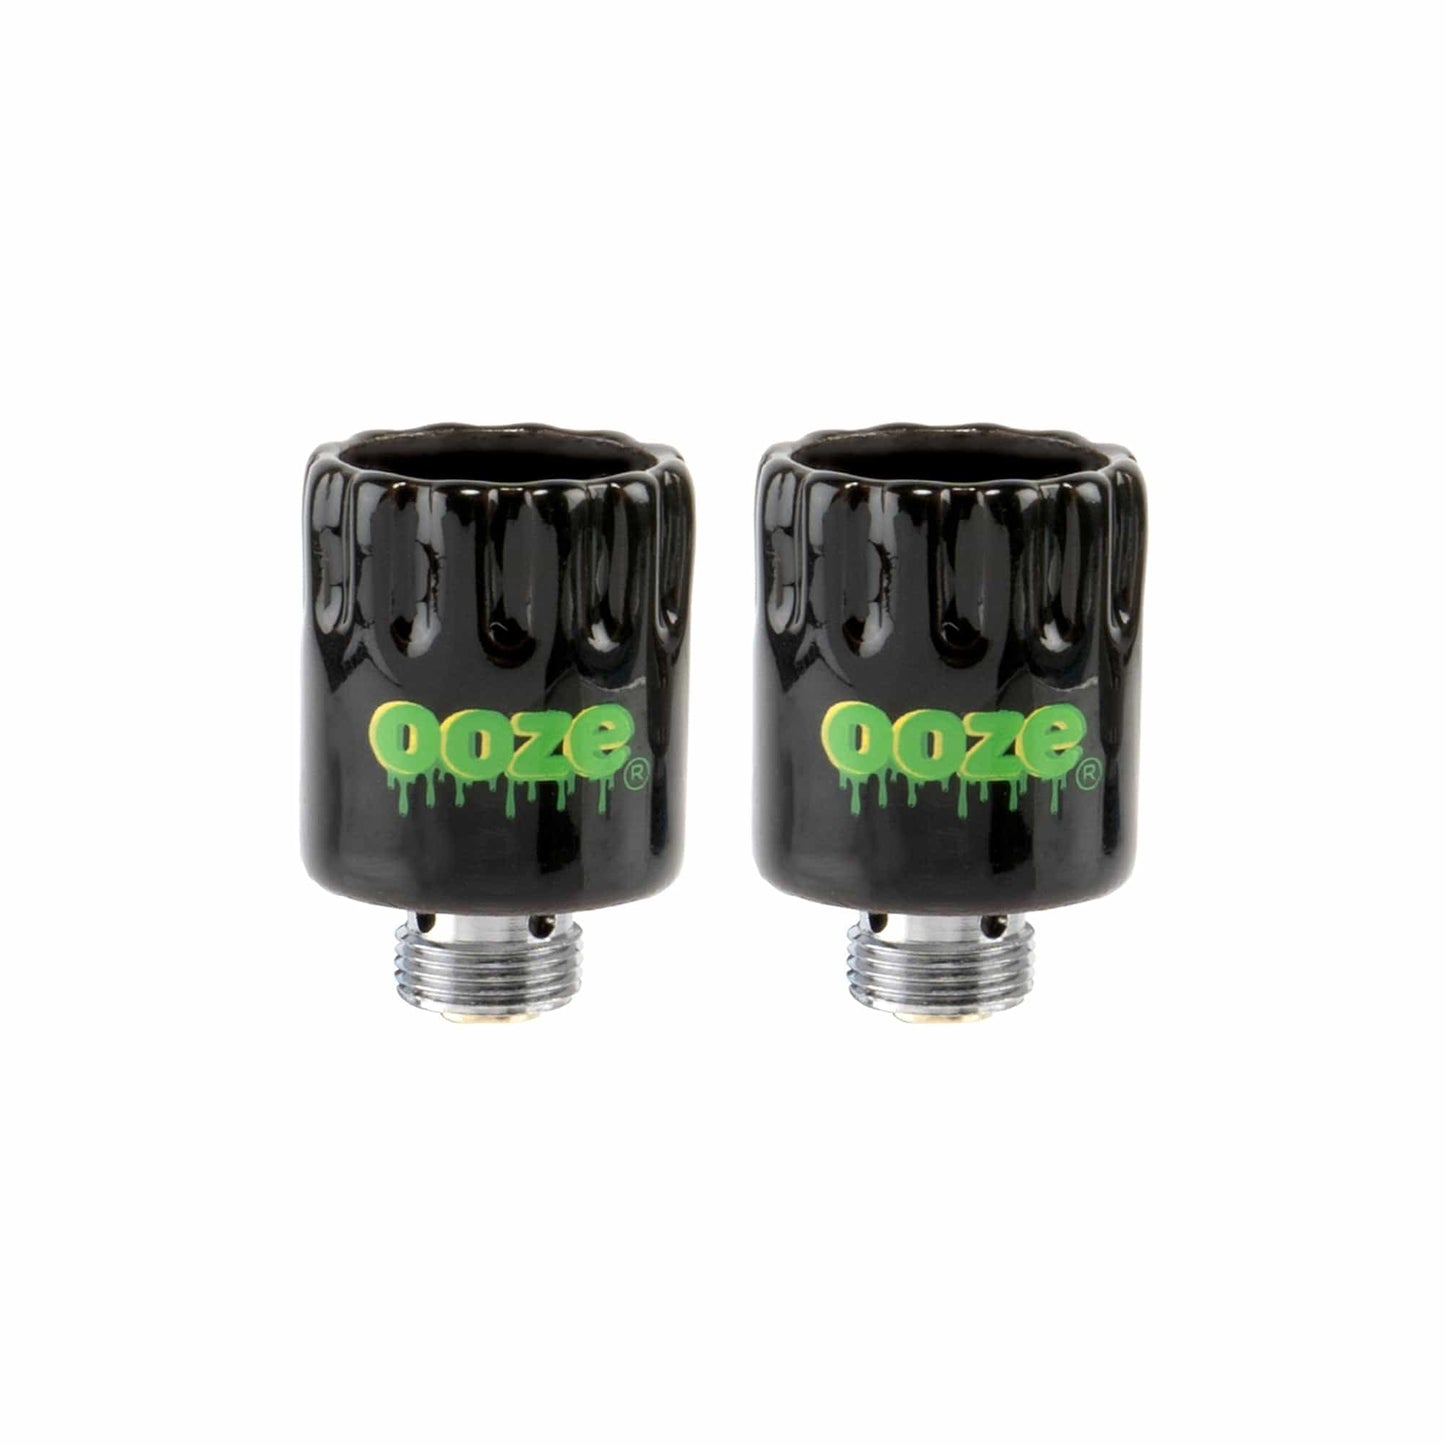 Ooze Coils and Parts Duplex 2 Replacement Onyx Atomizer Packs